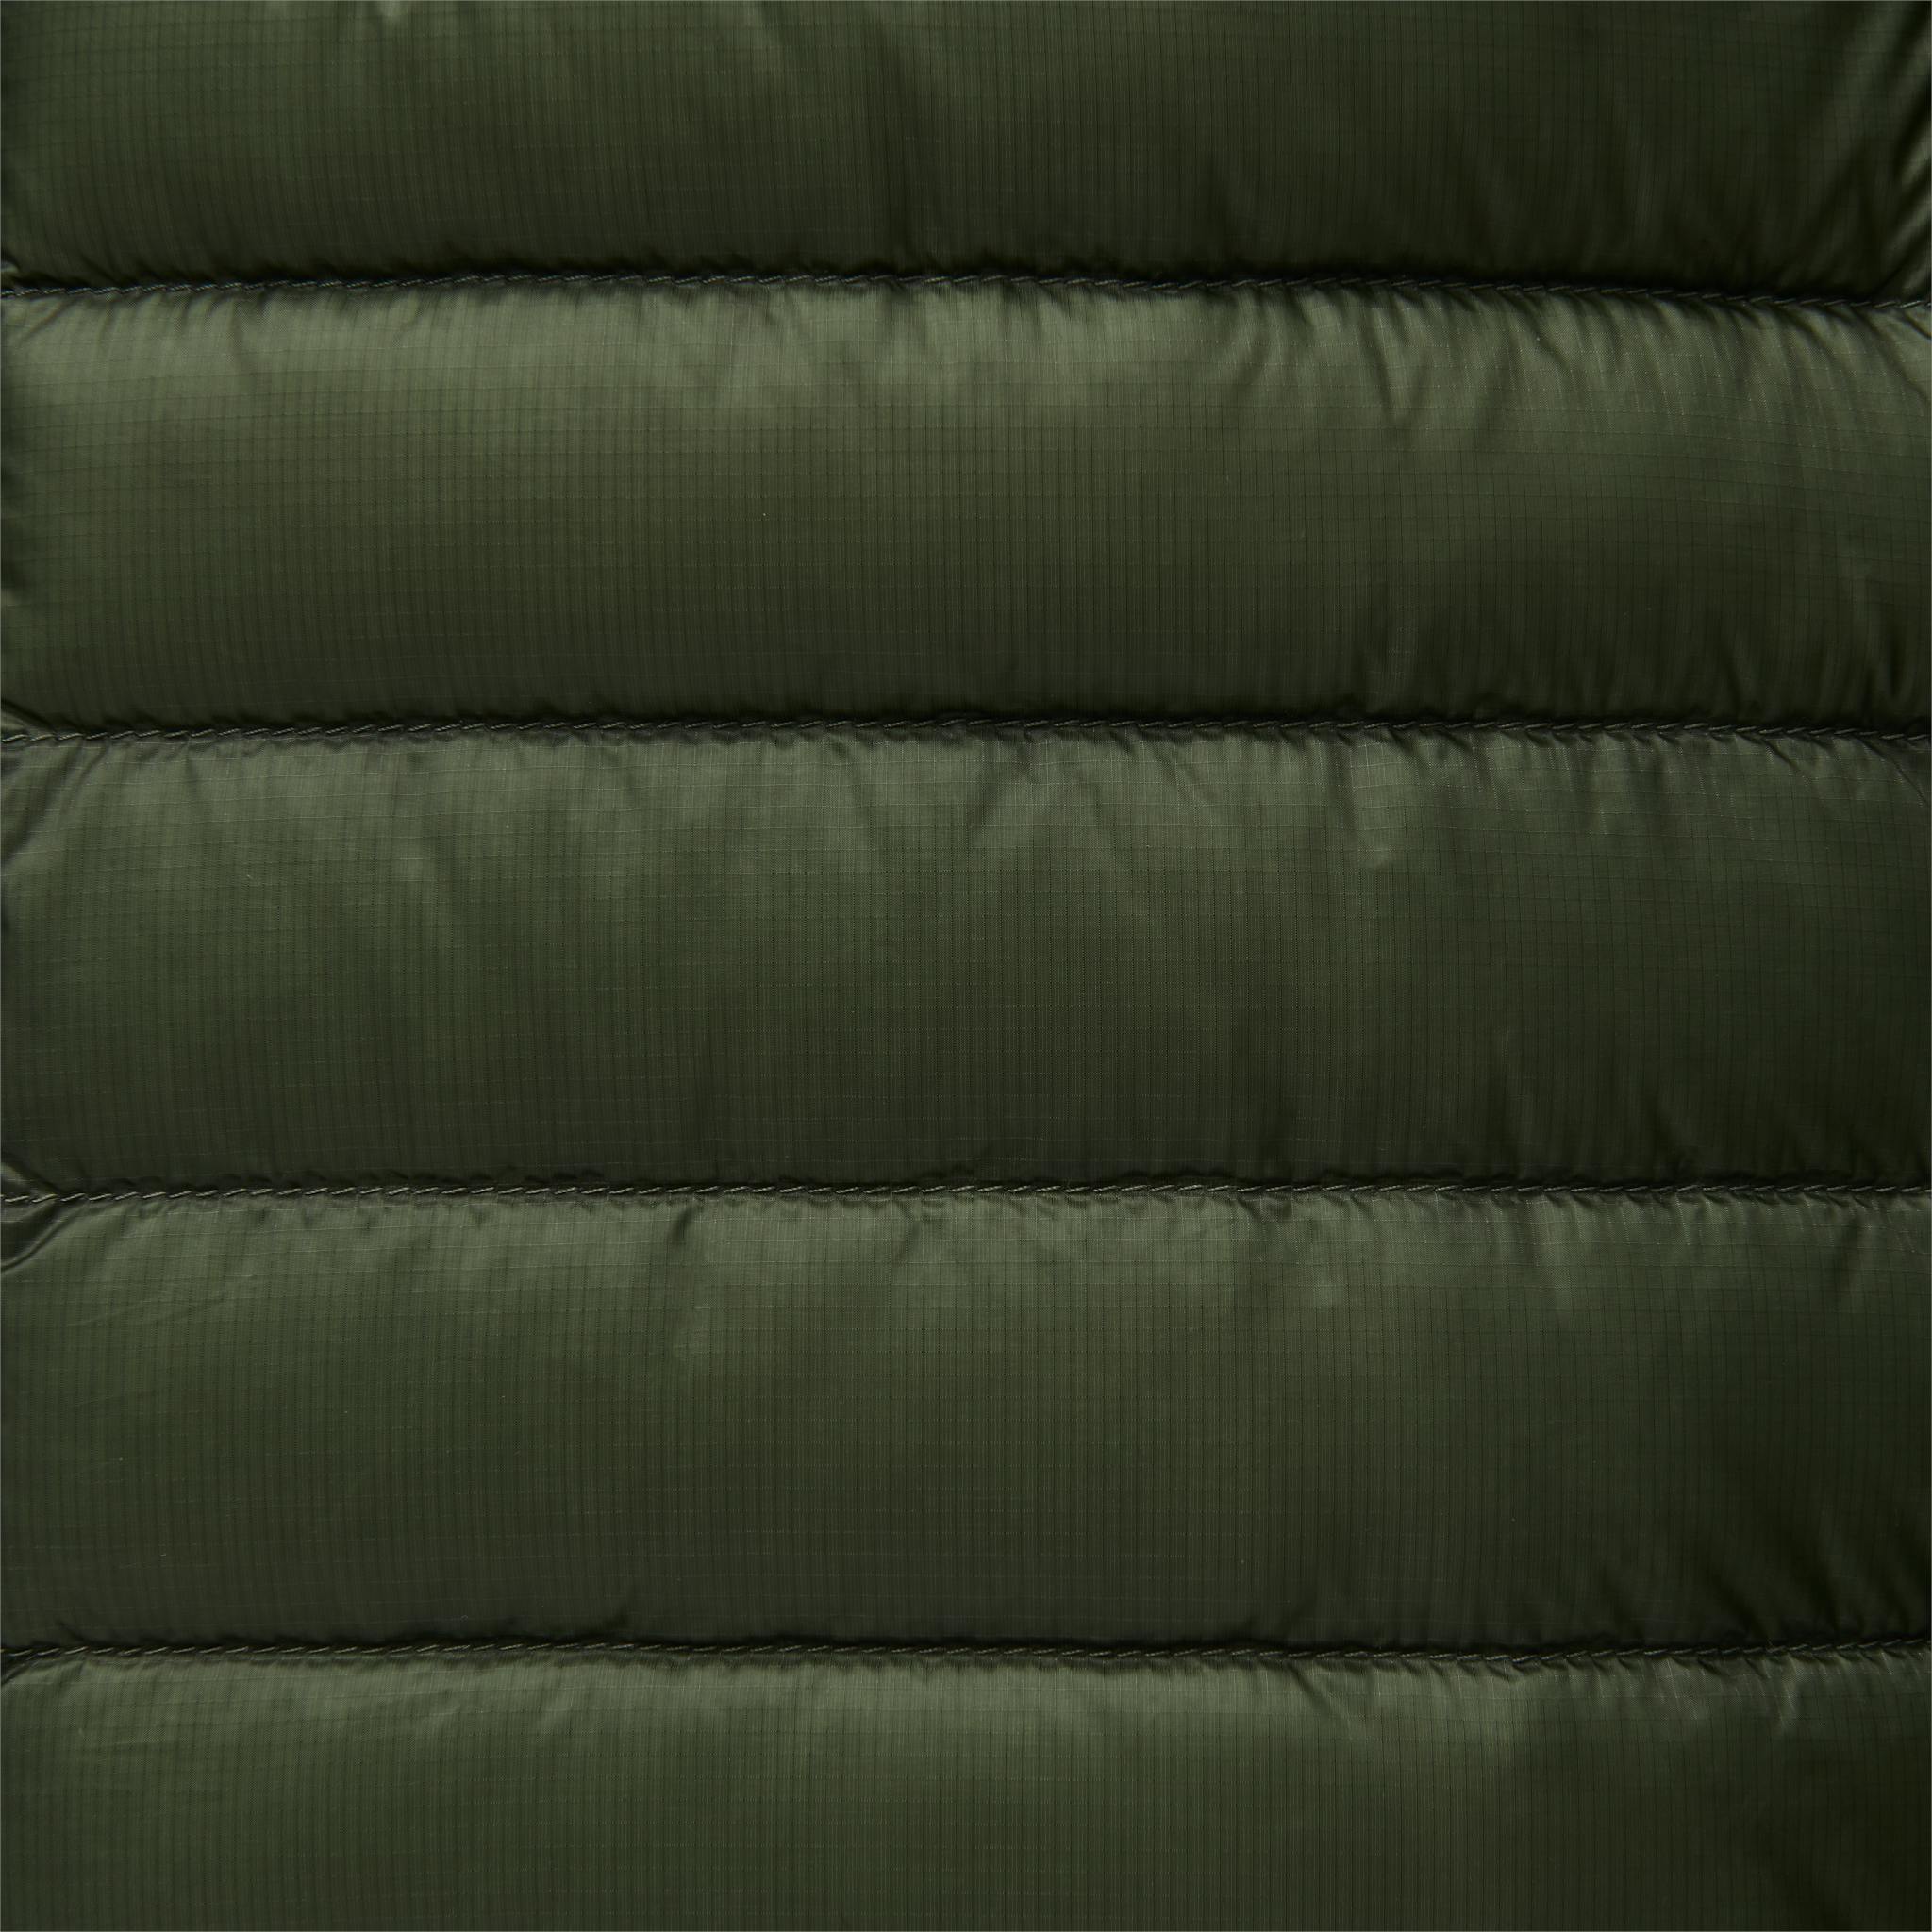 800-fill, RDS-certified Allied HyperDRY™ goose down insulation